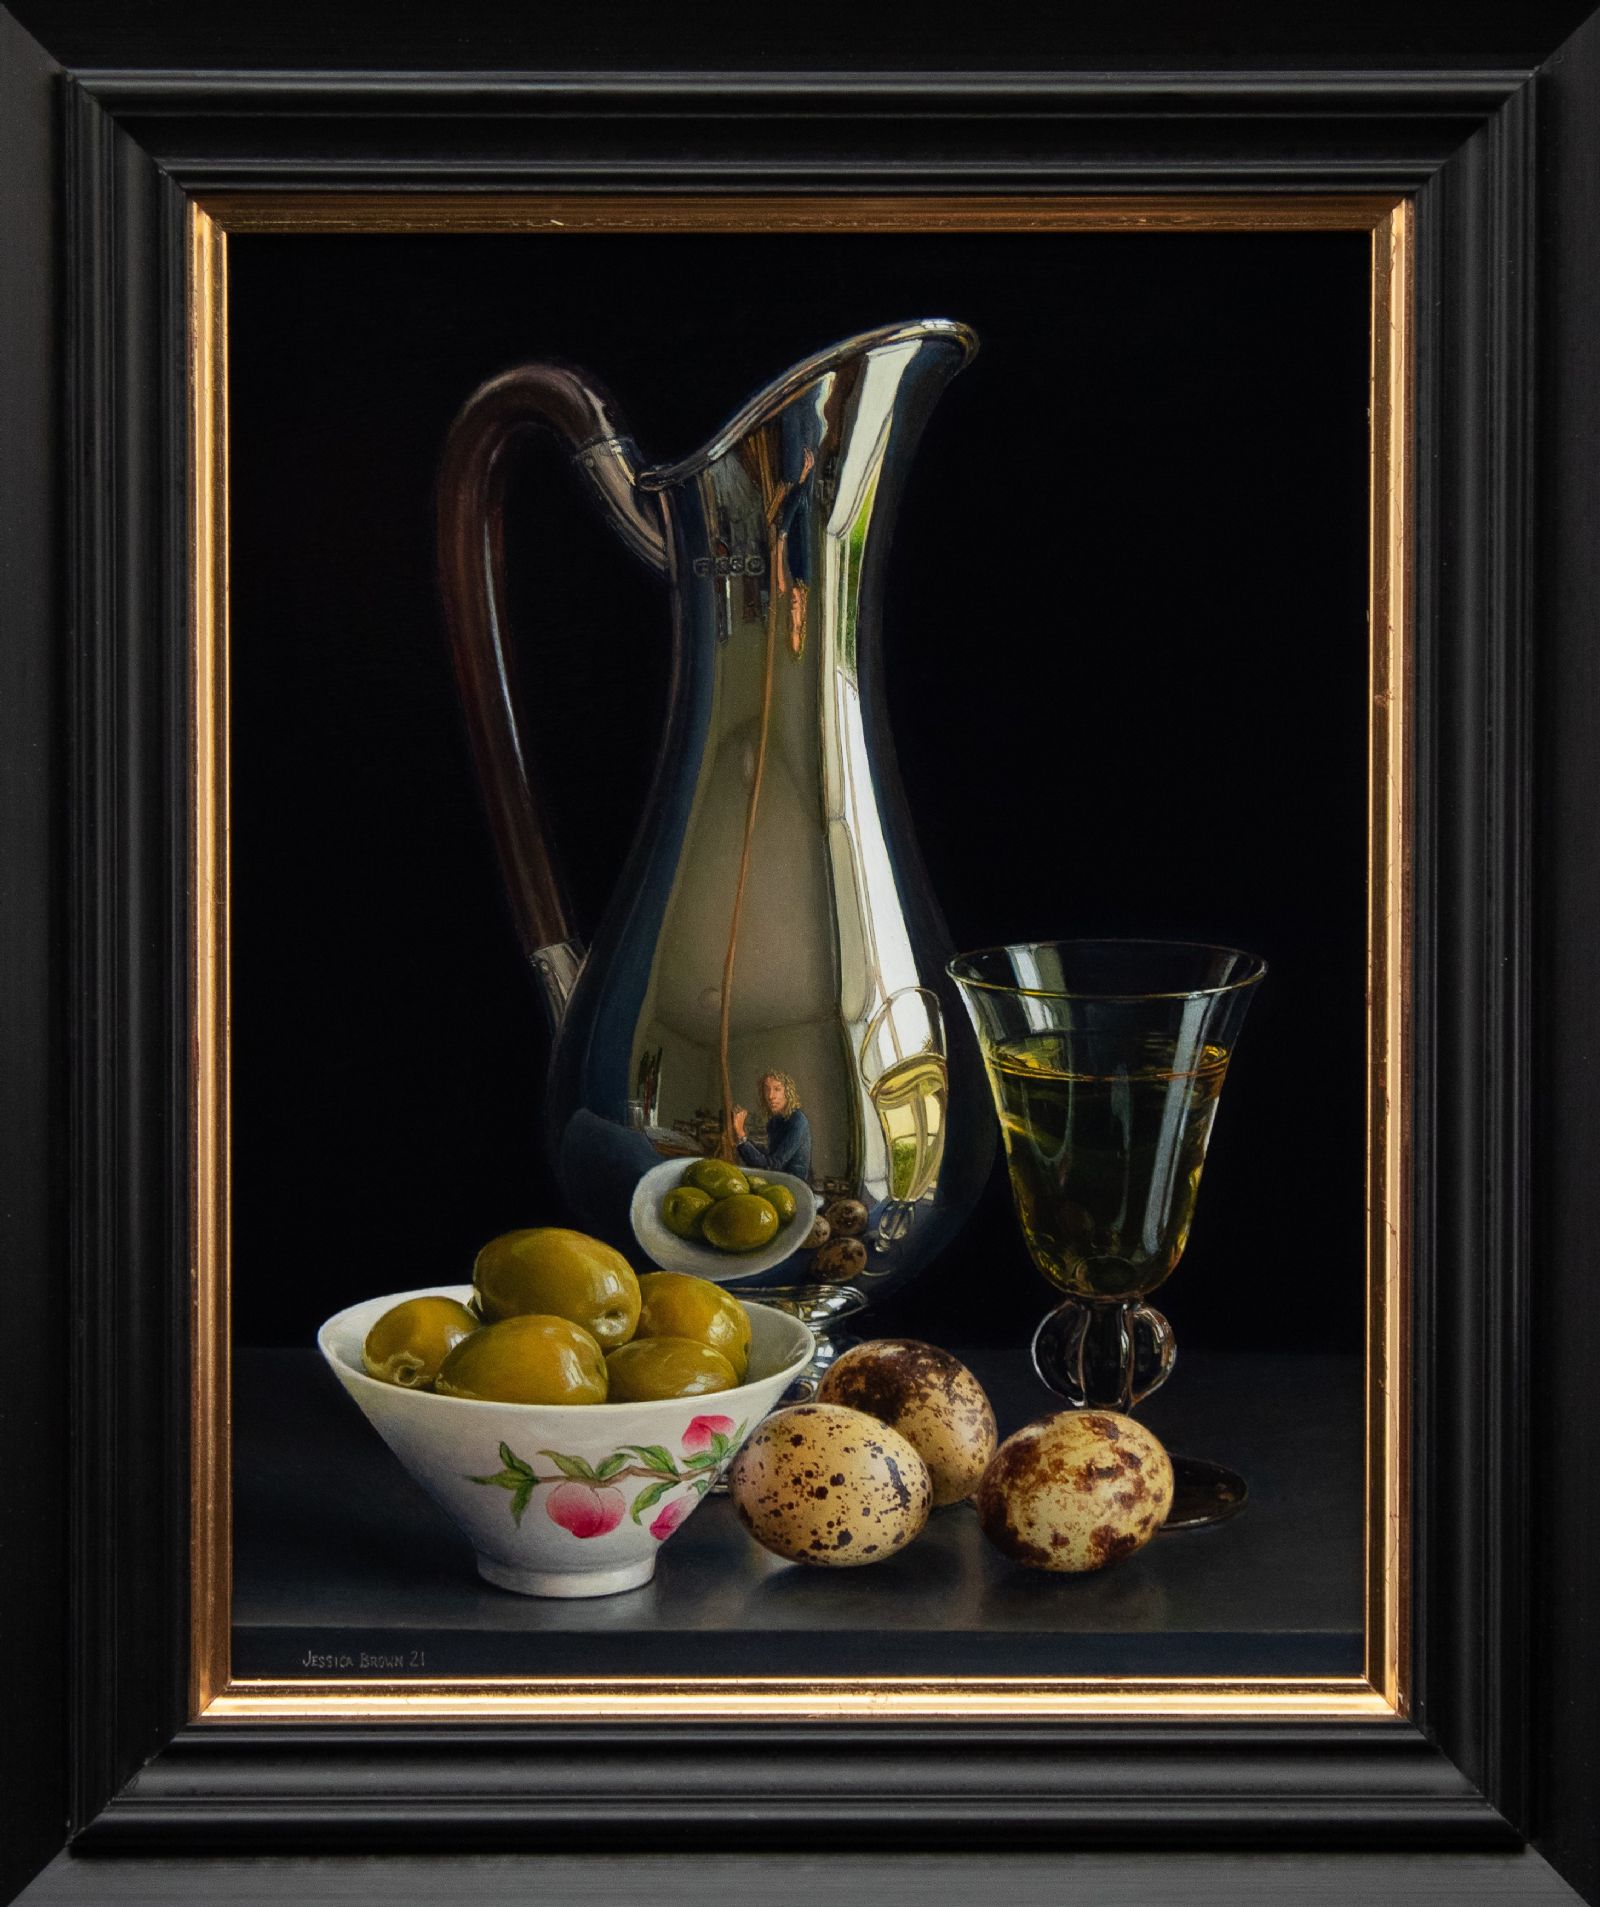 Still Life with Silver Jug, Quails Eggs and Olives in a Famille Rose Porcelain Bowl by Jessica Brown